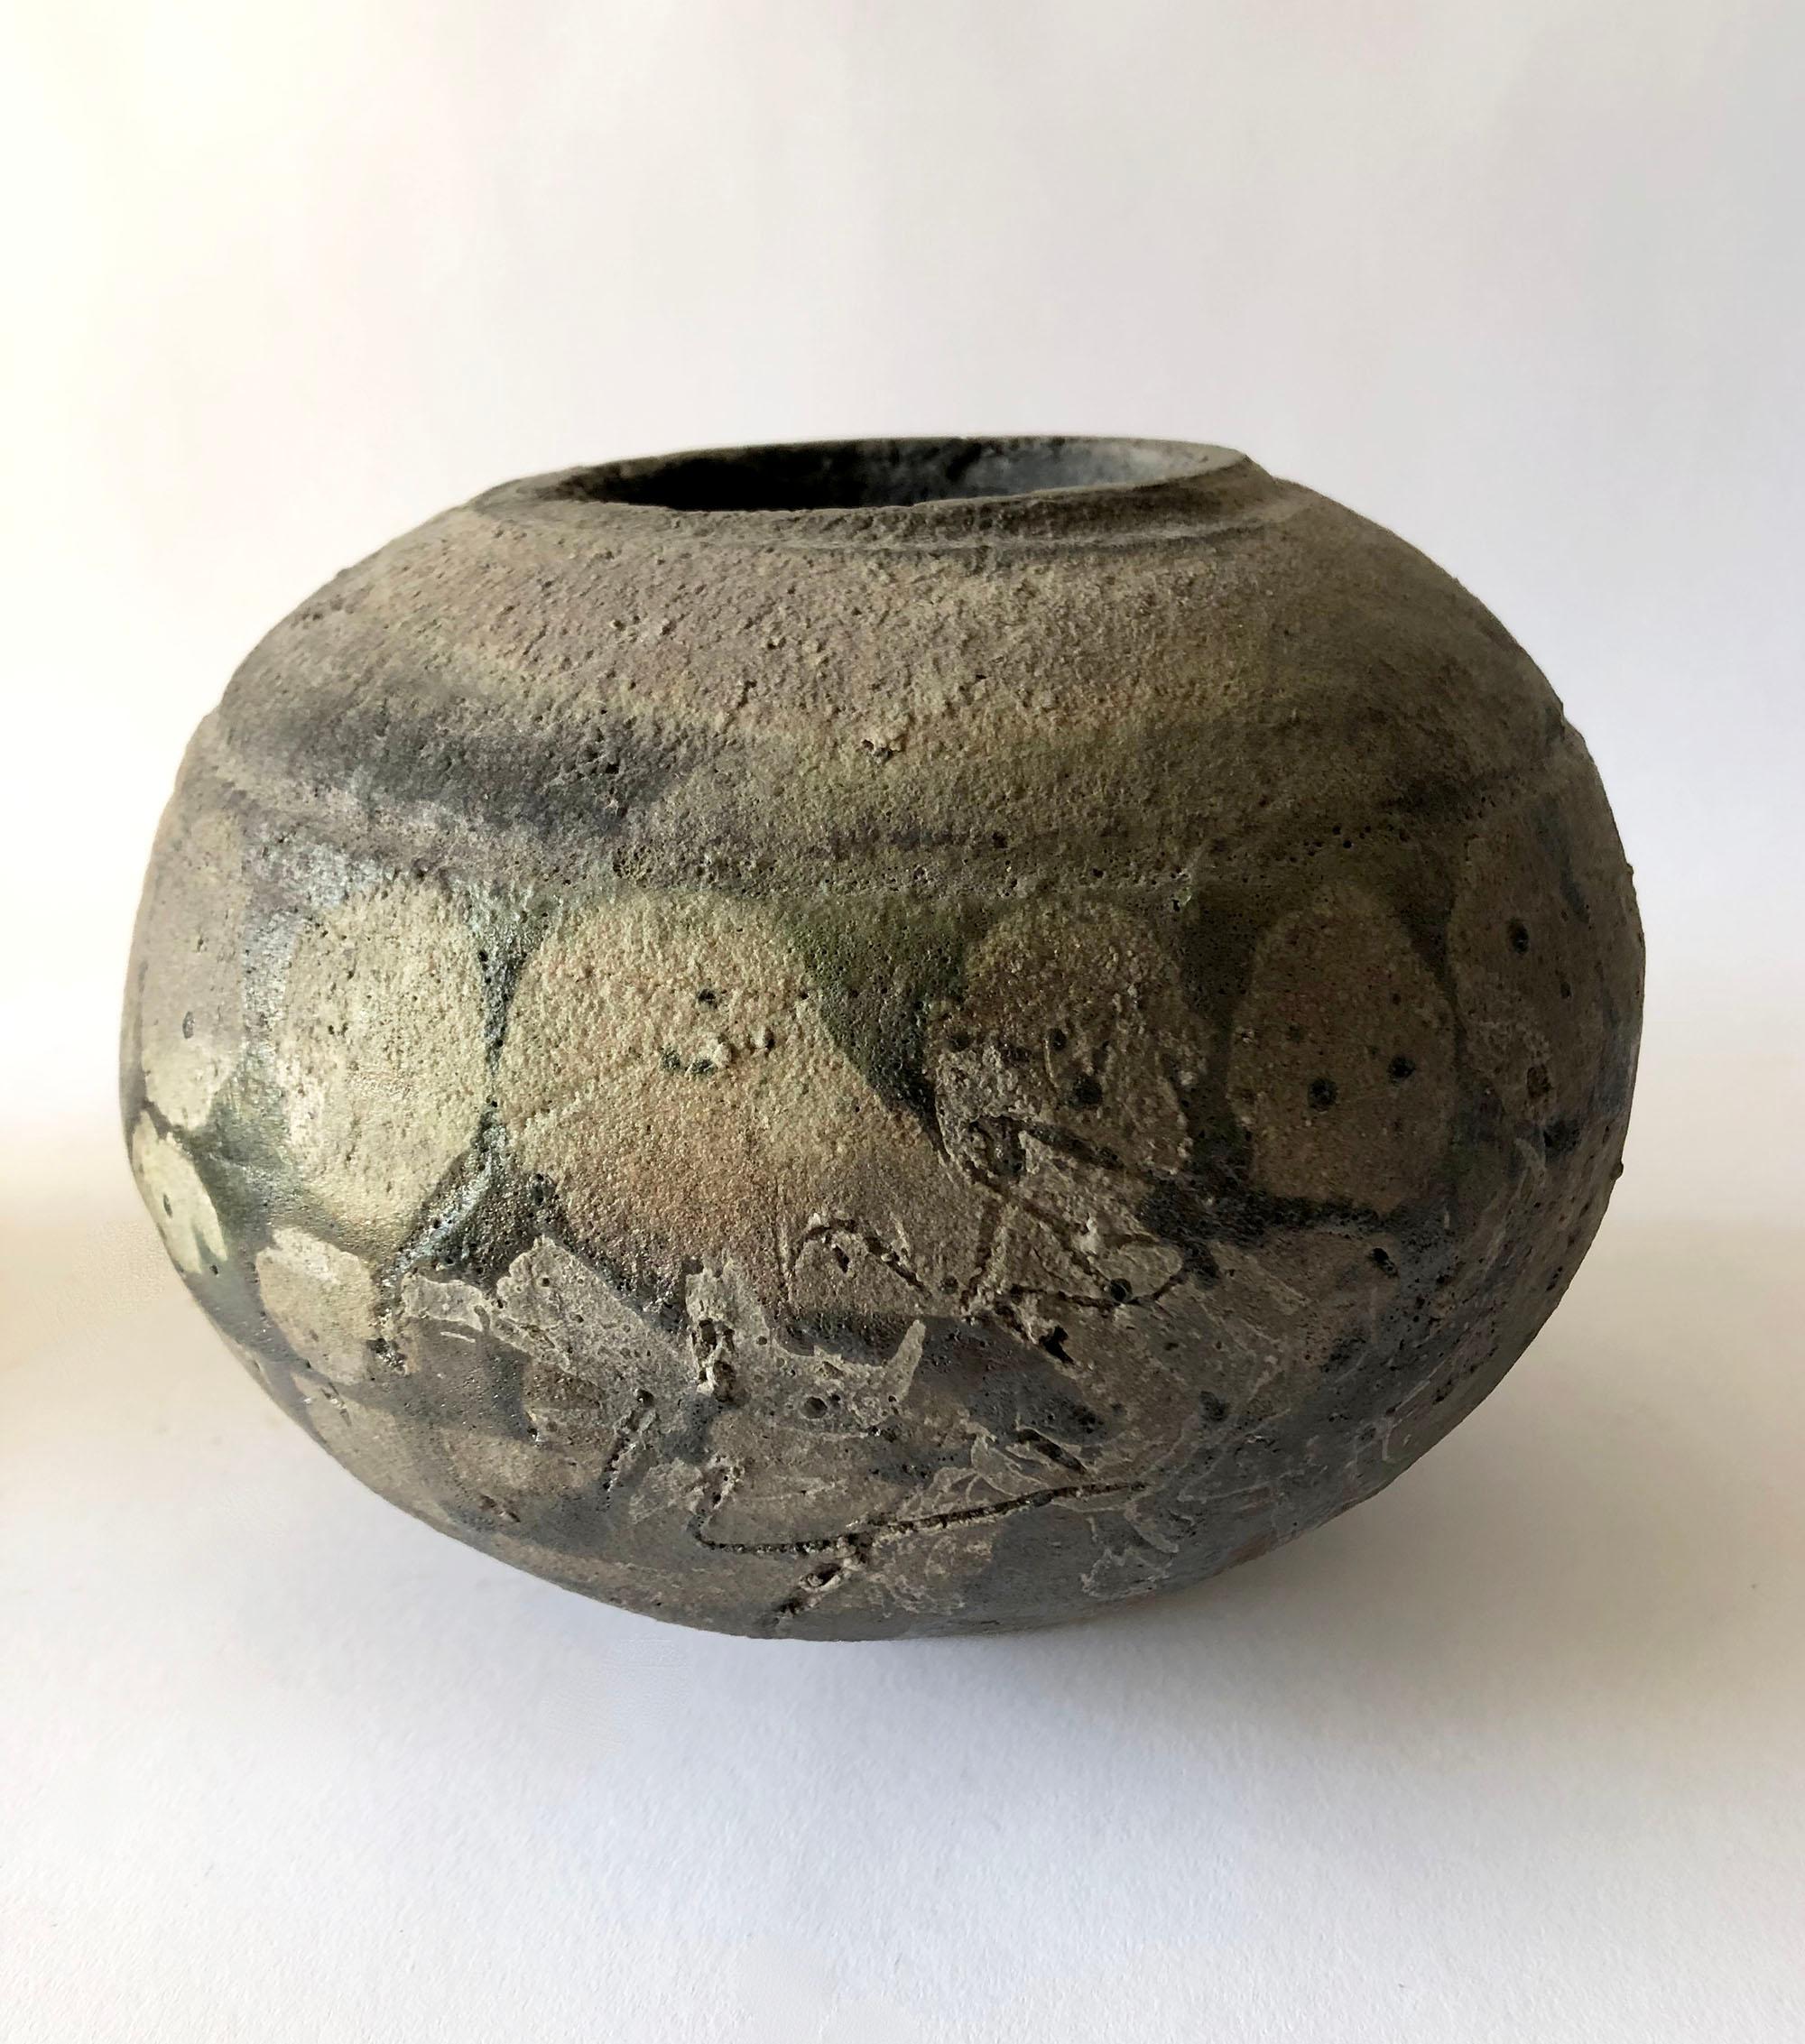 Early 1960s handmade California studio stoneware pottery vase possibly made by Paul Soldner as a test for raku firing.  Vase measures: 6